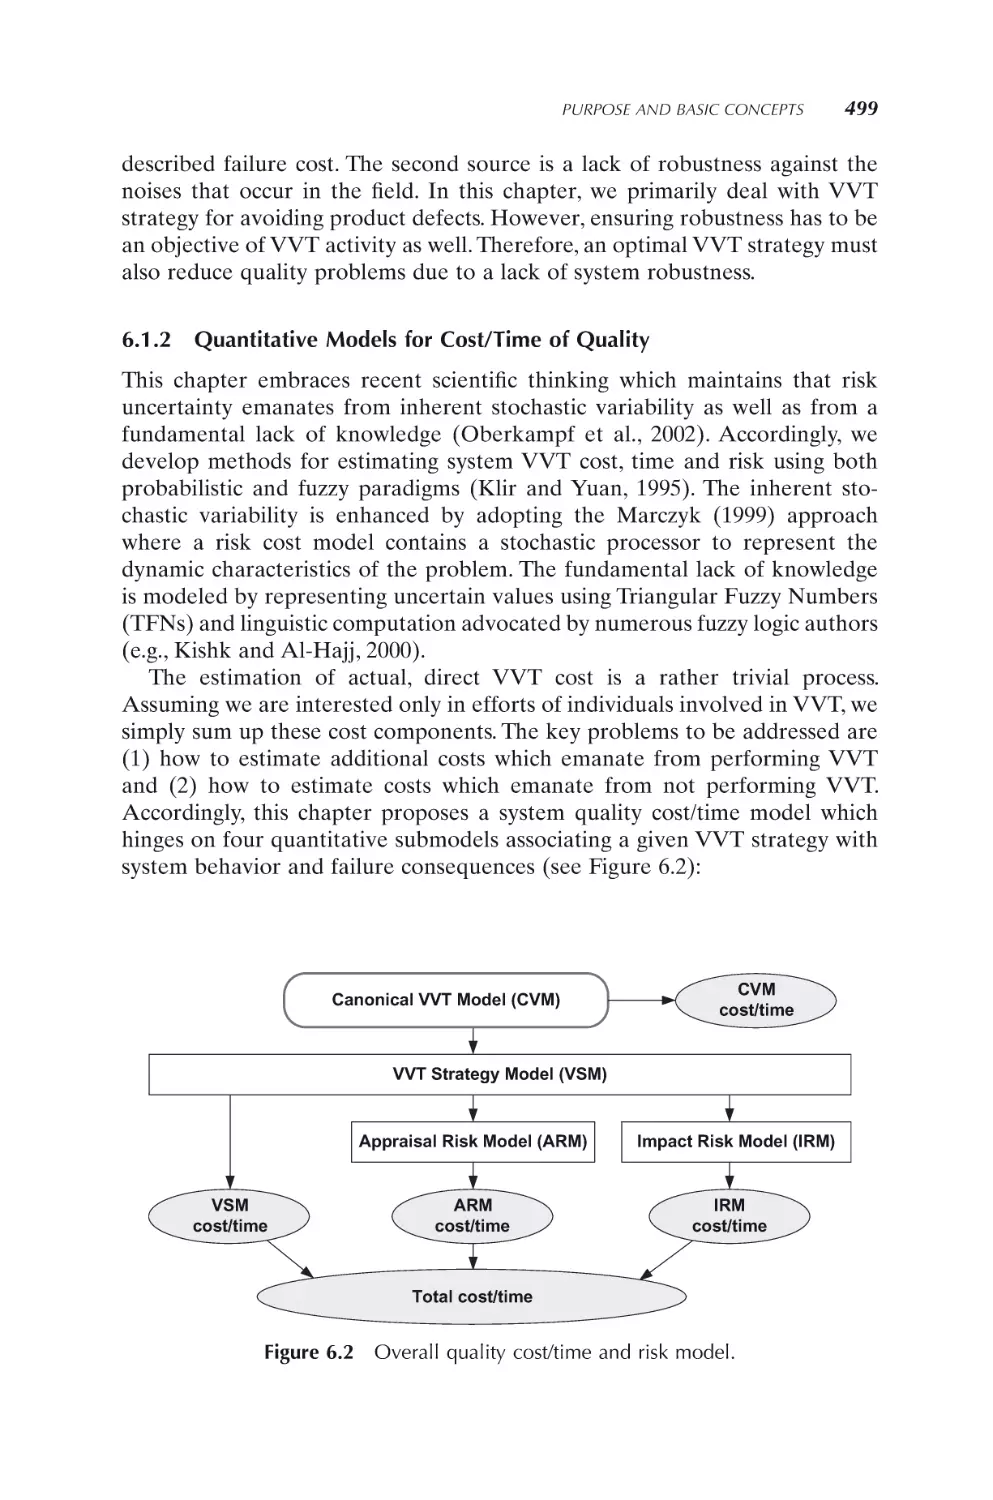 6.1.2 Quantitative Models for Cost/Time of Quality